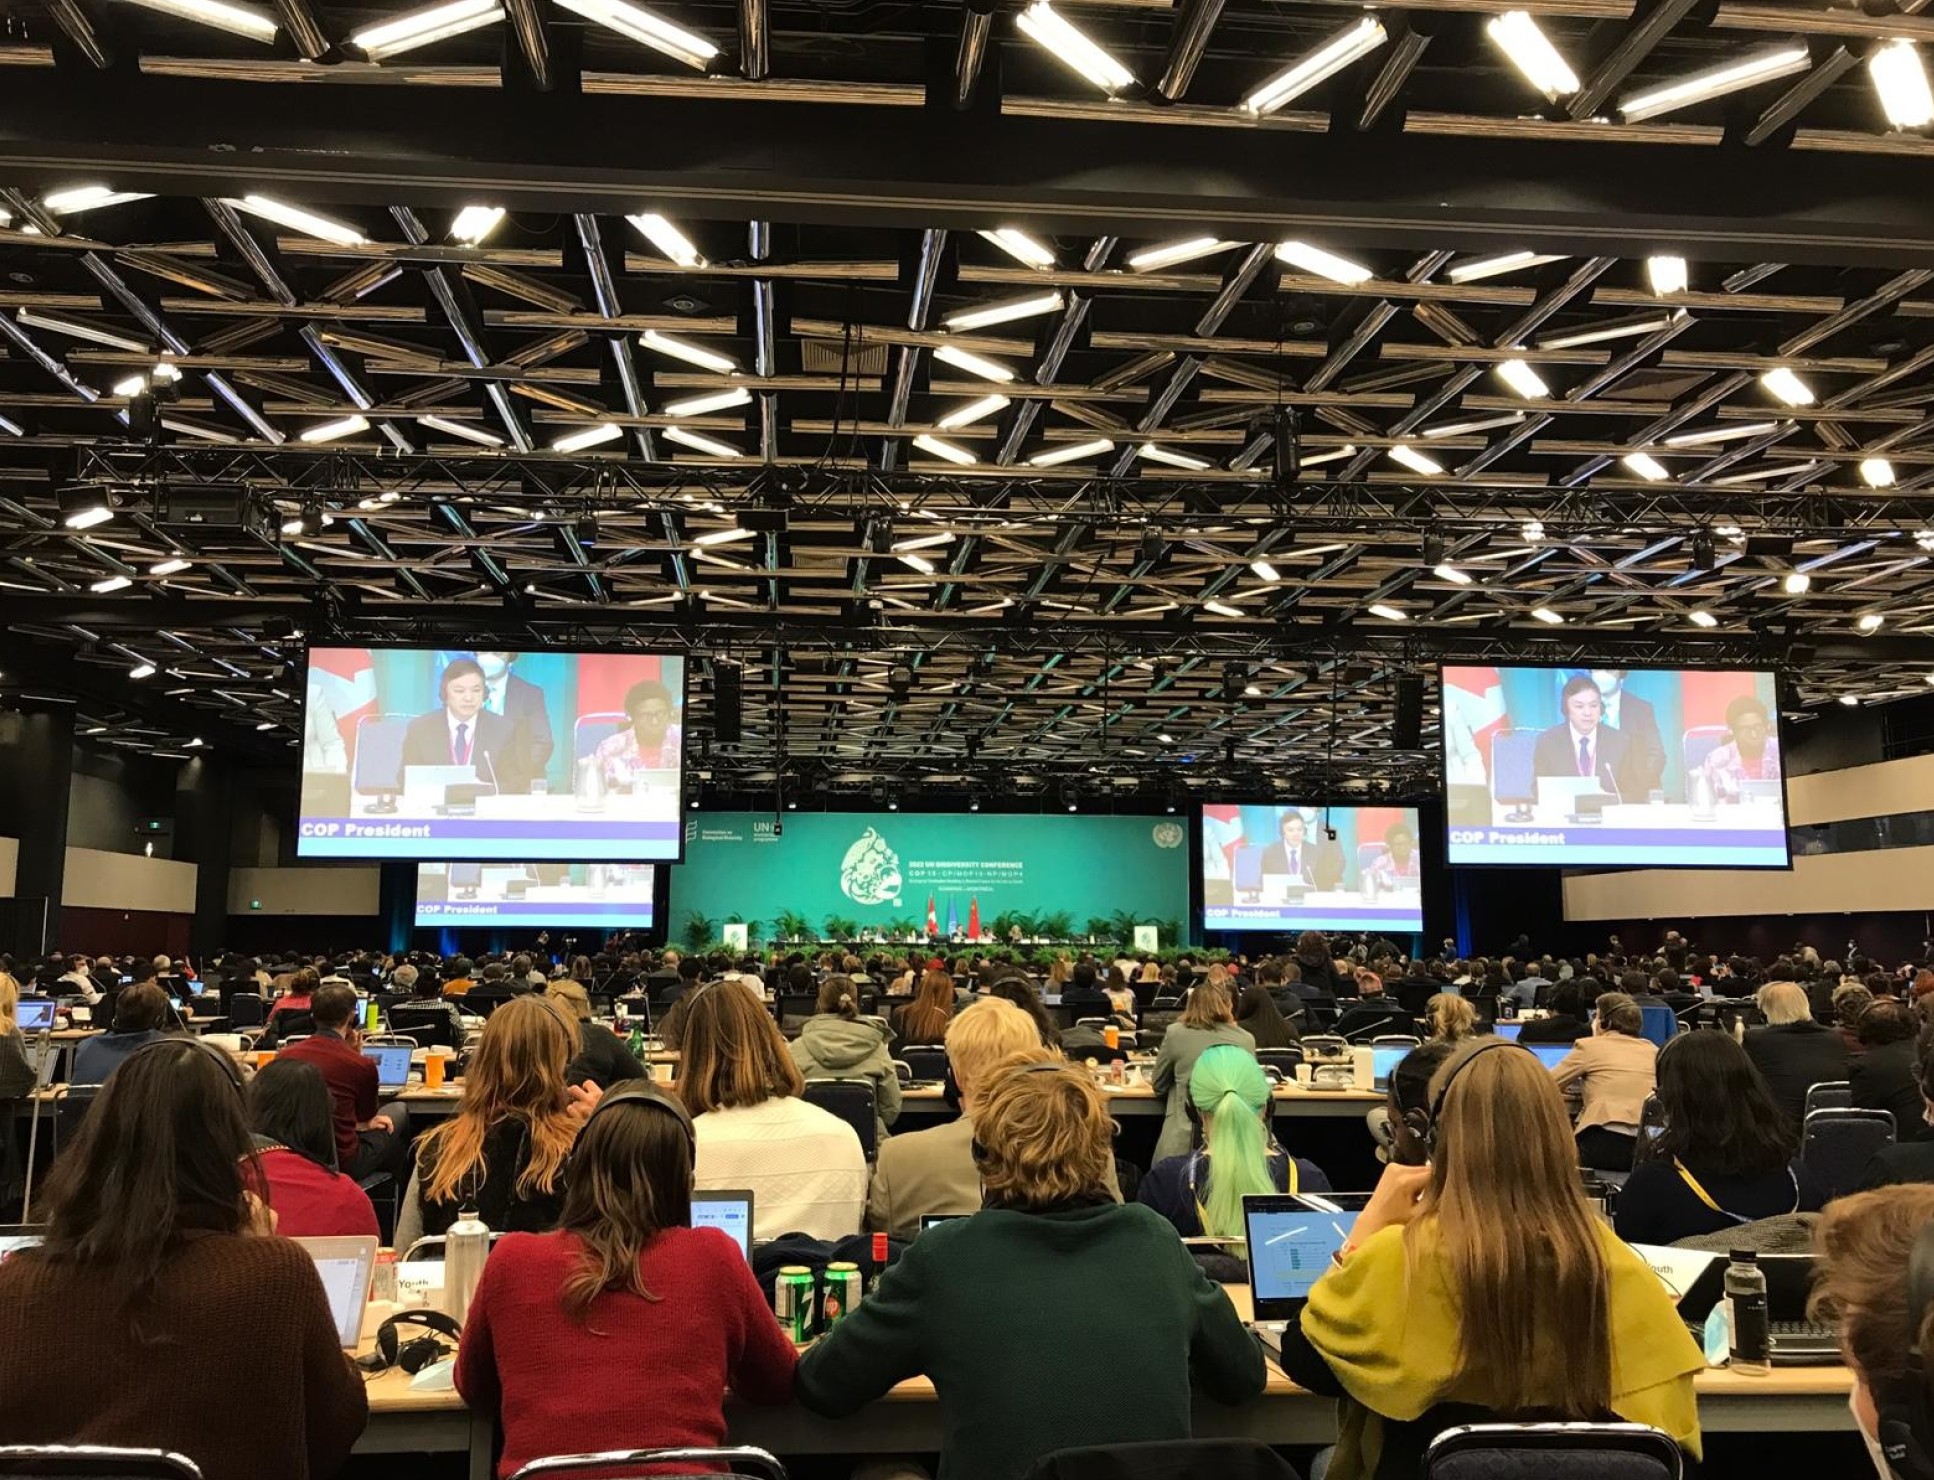 Delegates at the COP15 conference listen to a speaker